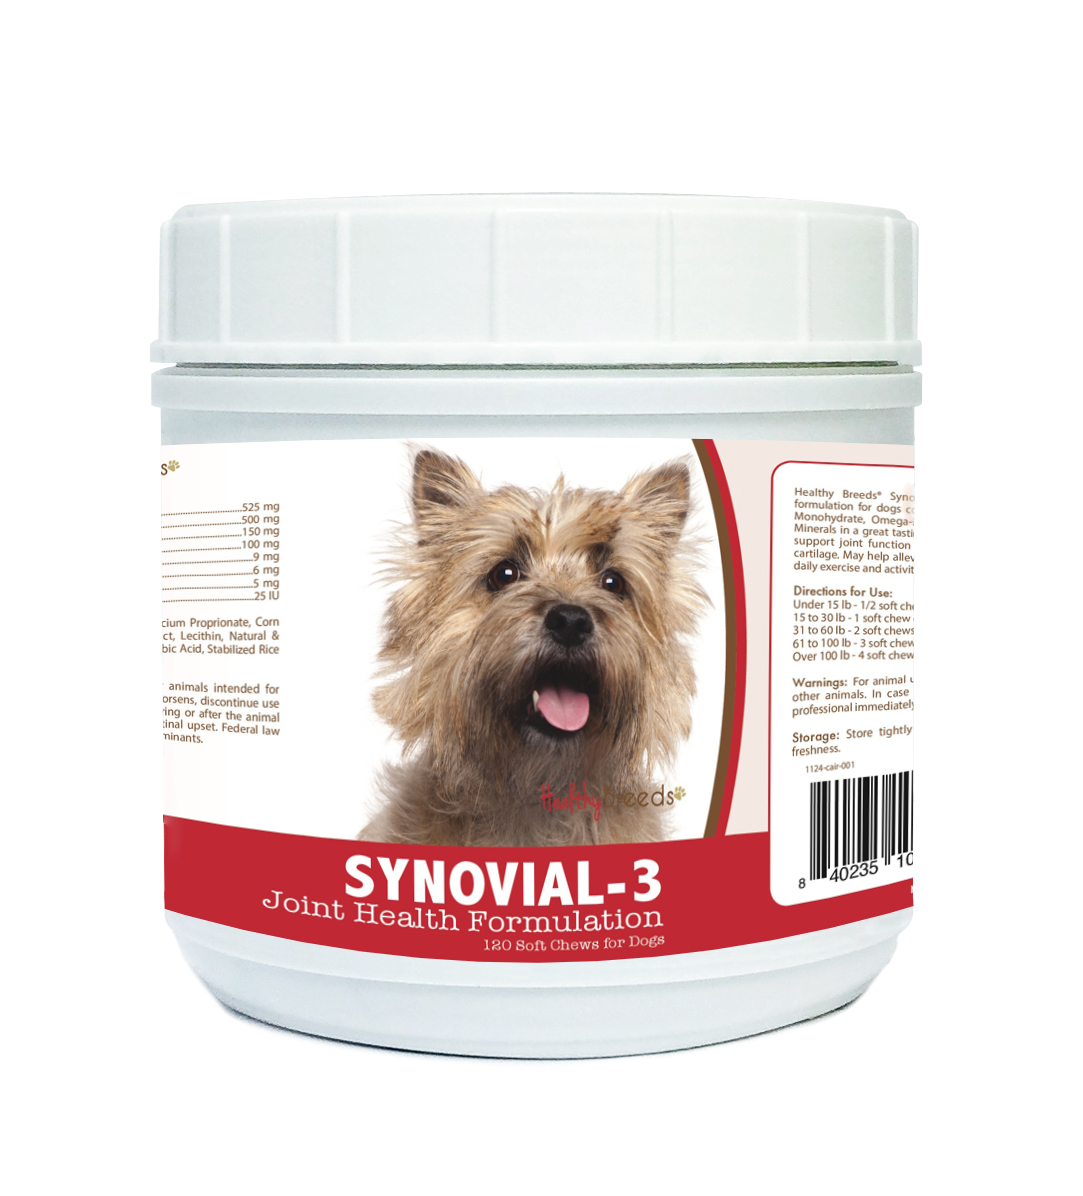 Picture of Healthy Breeds 840235104186 Cairn Terrier Synovial-3 Joint Health Formulation, 120 Count